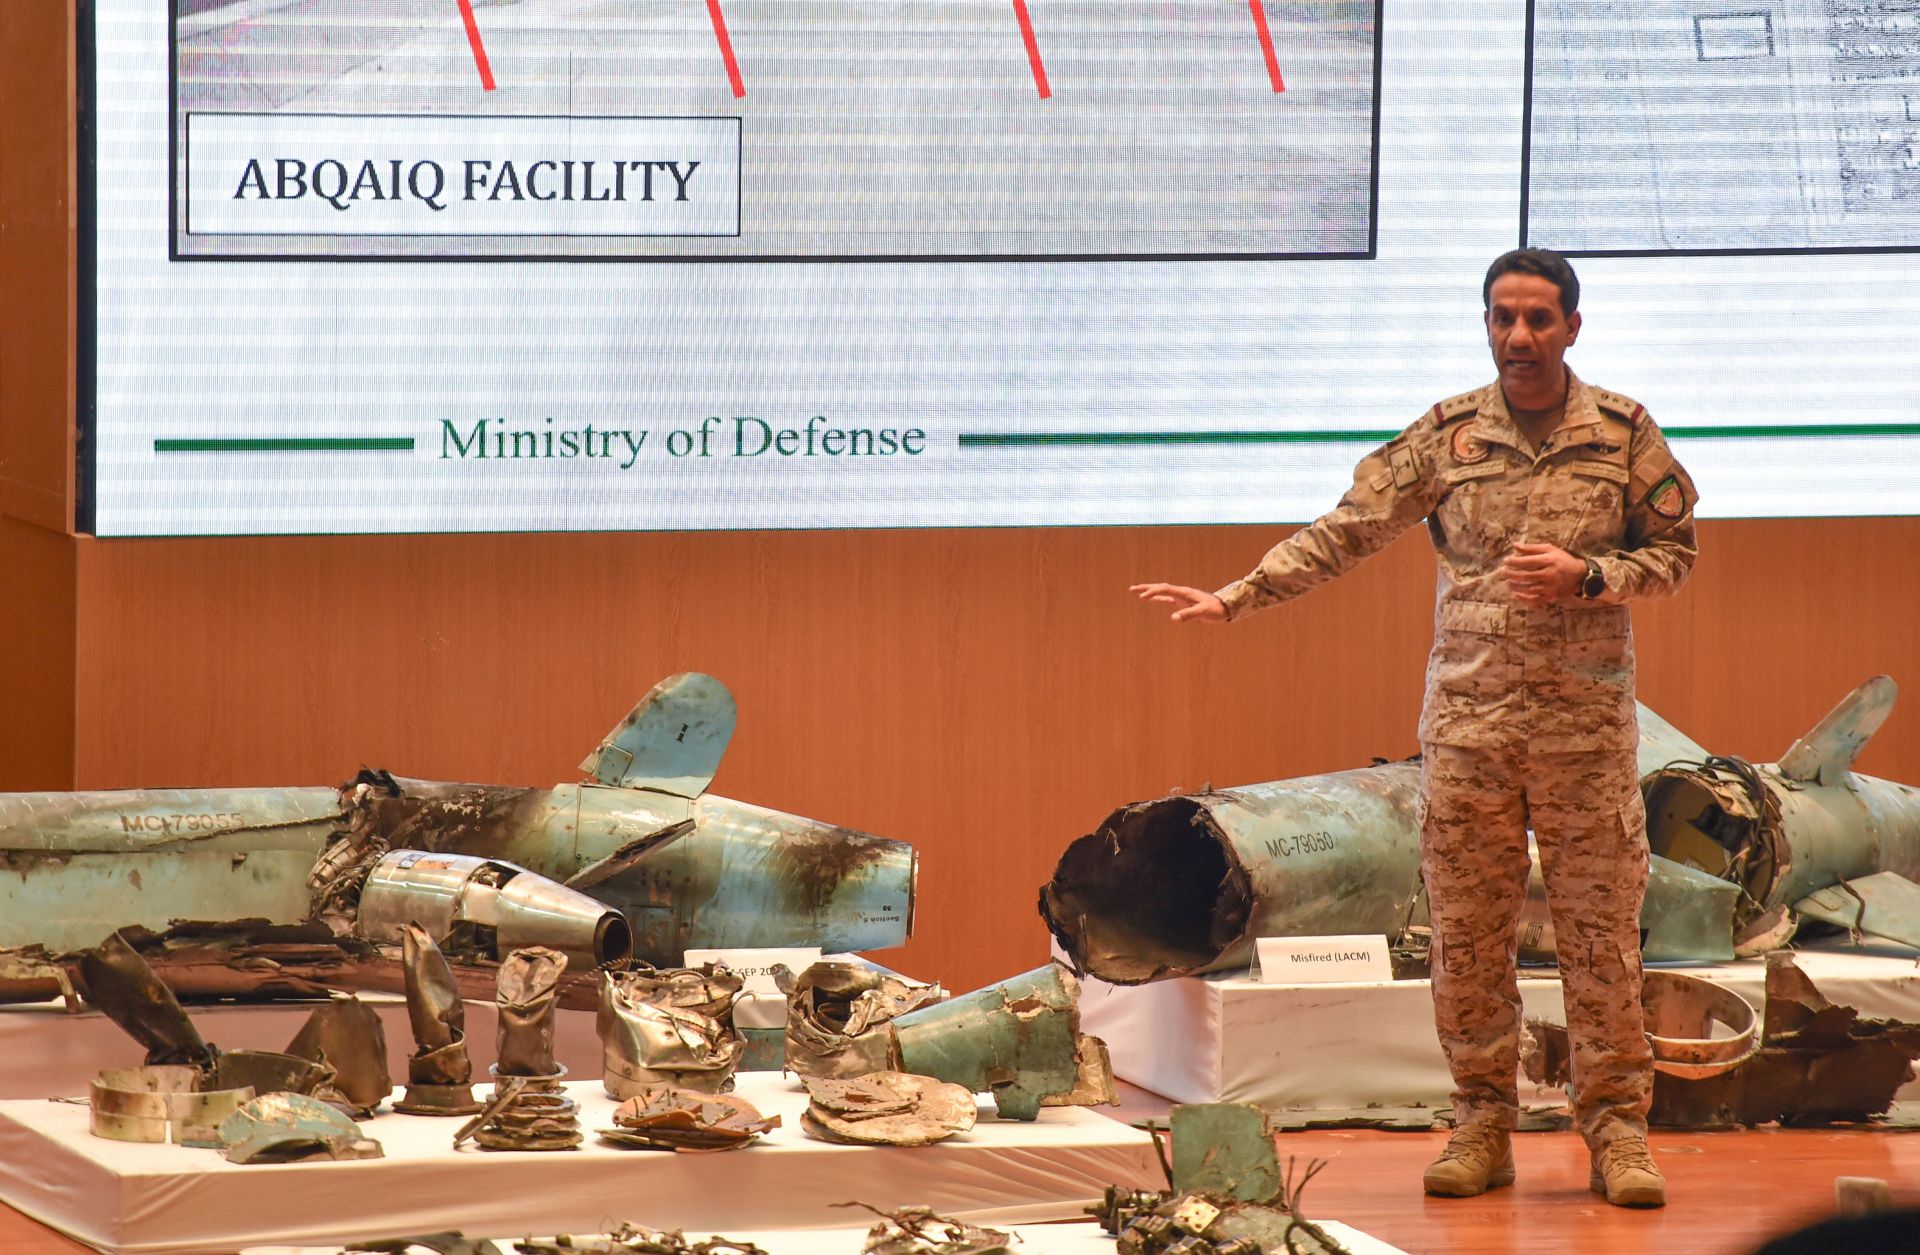 Saudi Defense Ministry spokesman Col. Turki al-Malki displays pieces of what he said were Iranian cruise missiles and drones recovered from an attack on Saudi oil facilities, during a press conference in Riyadh on Sept. 18, 2019.